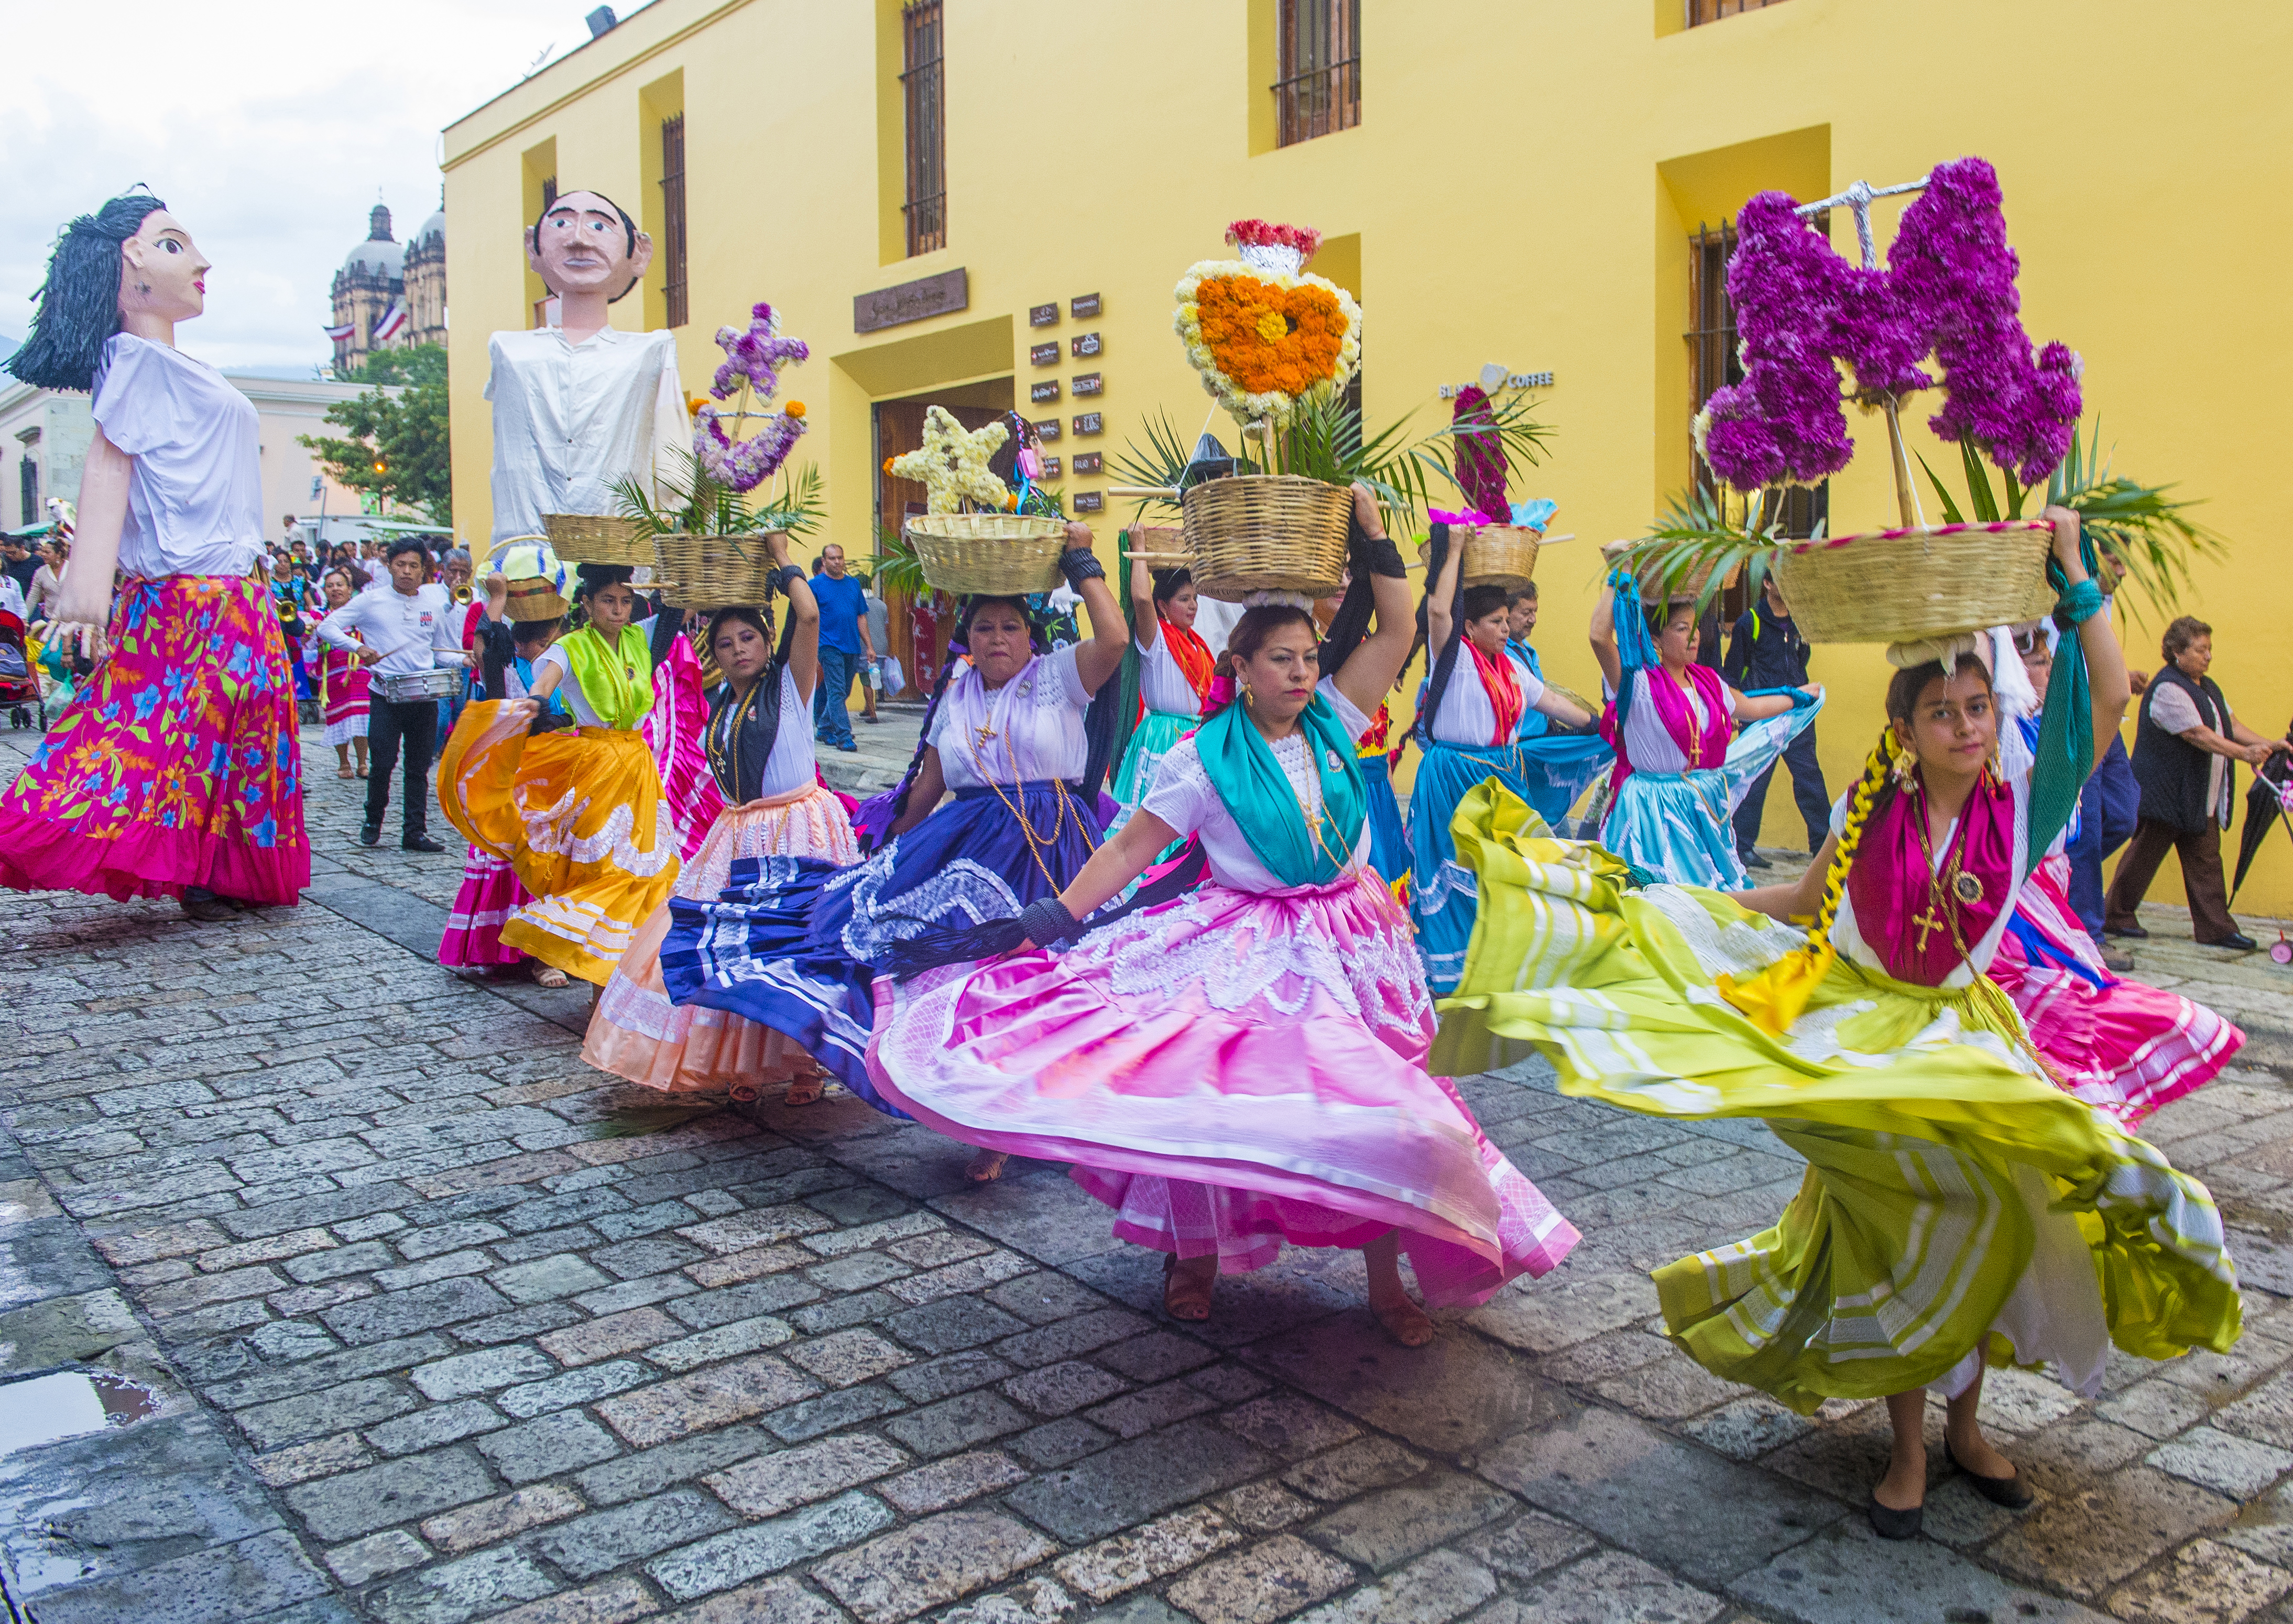 Halloween Destinations for Your Family Vacation - Day of the Dead Celebration in Oaxaca, Mexico